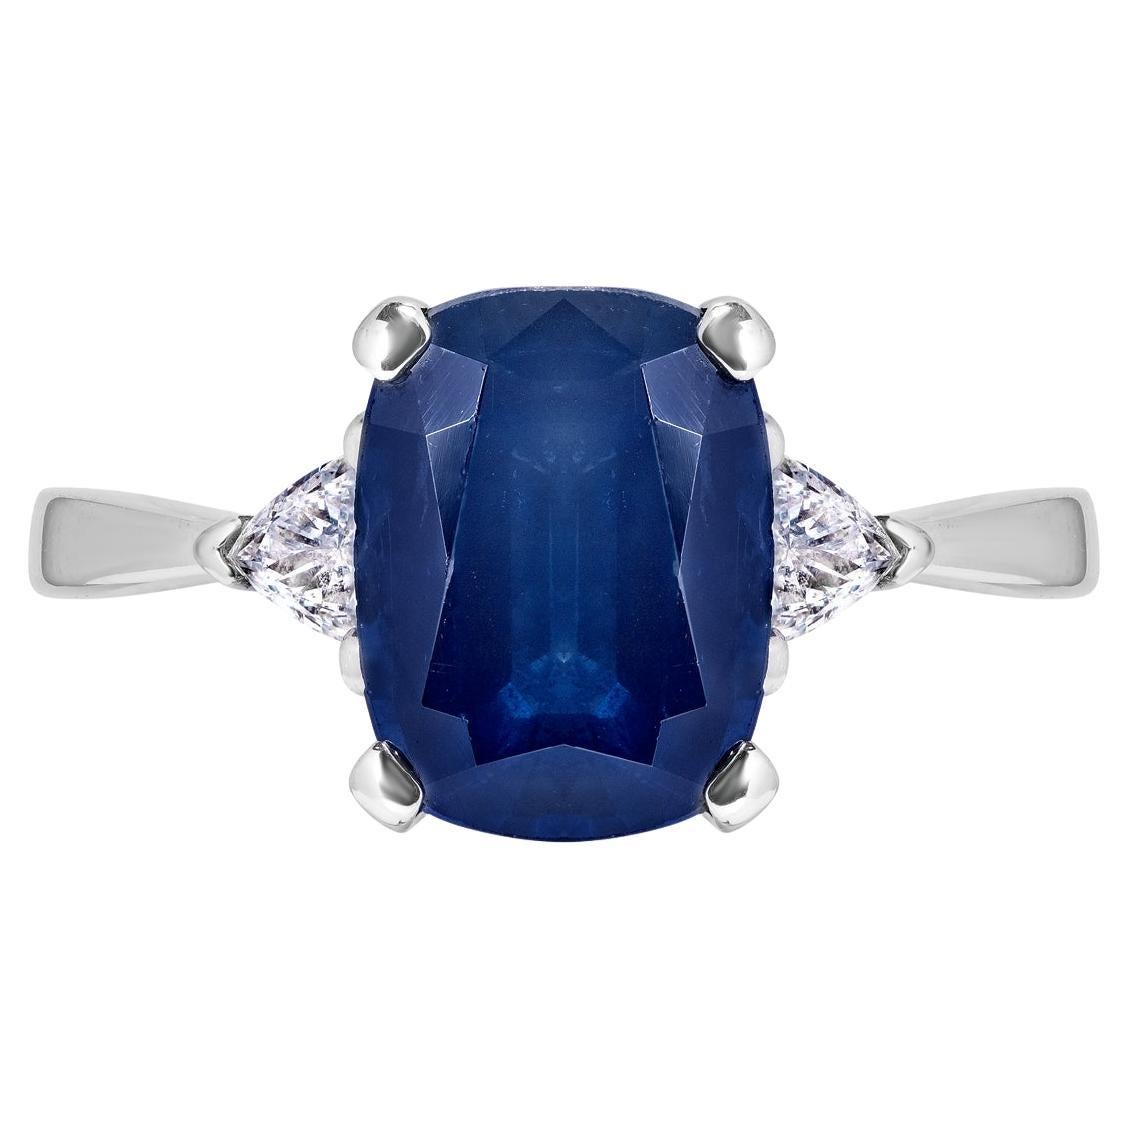 3 Carat Elongated Cushion Blue Sapphire Ring Certified For Sale